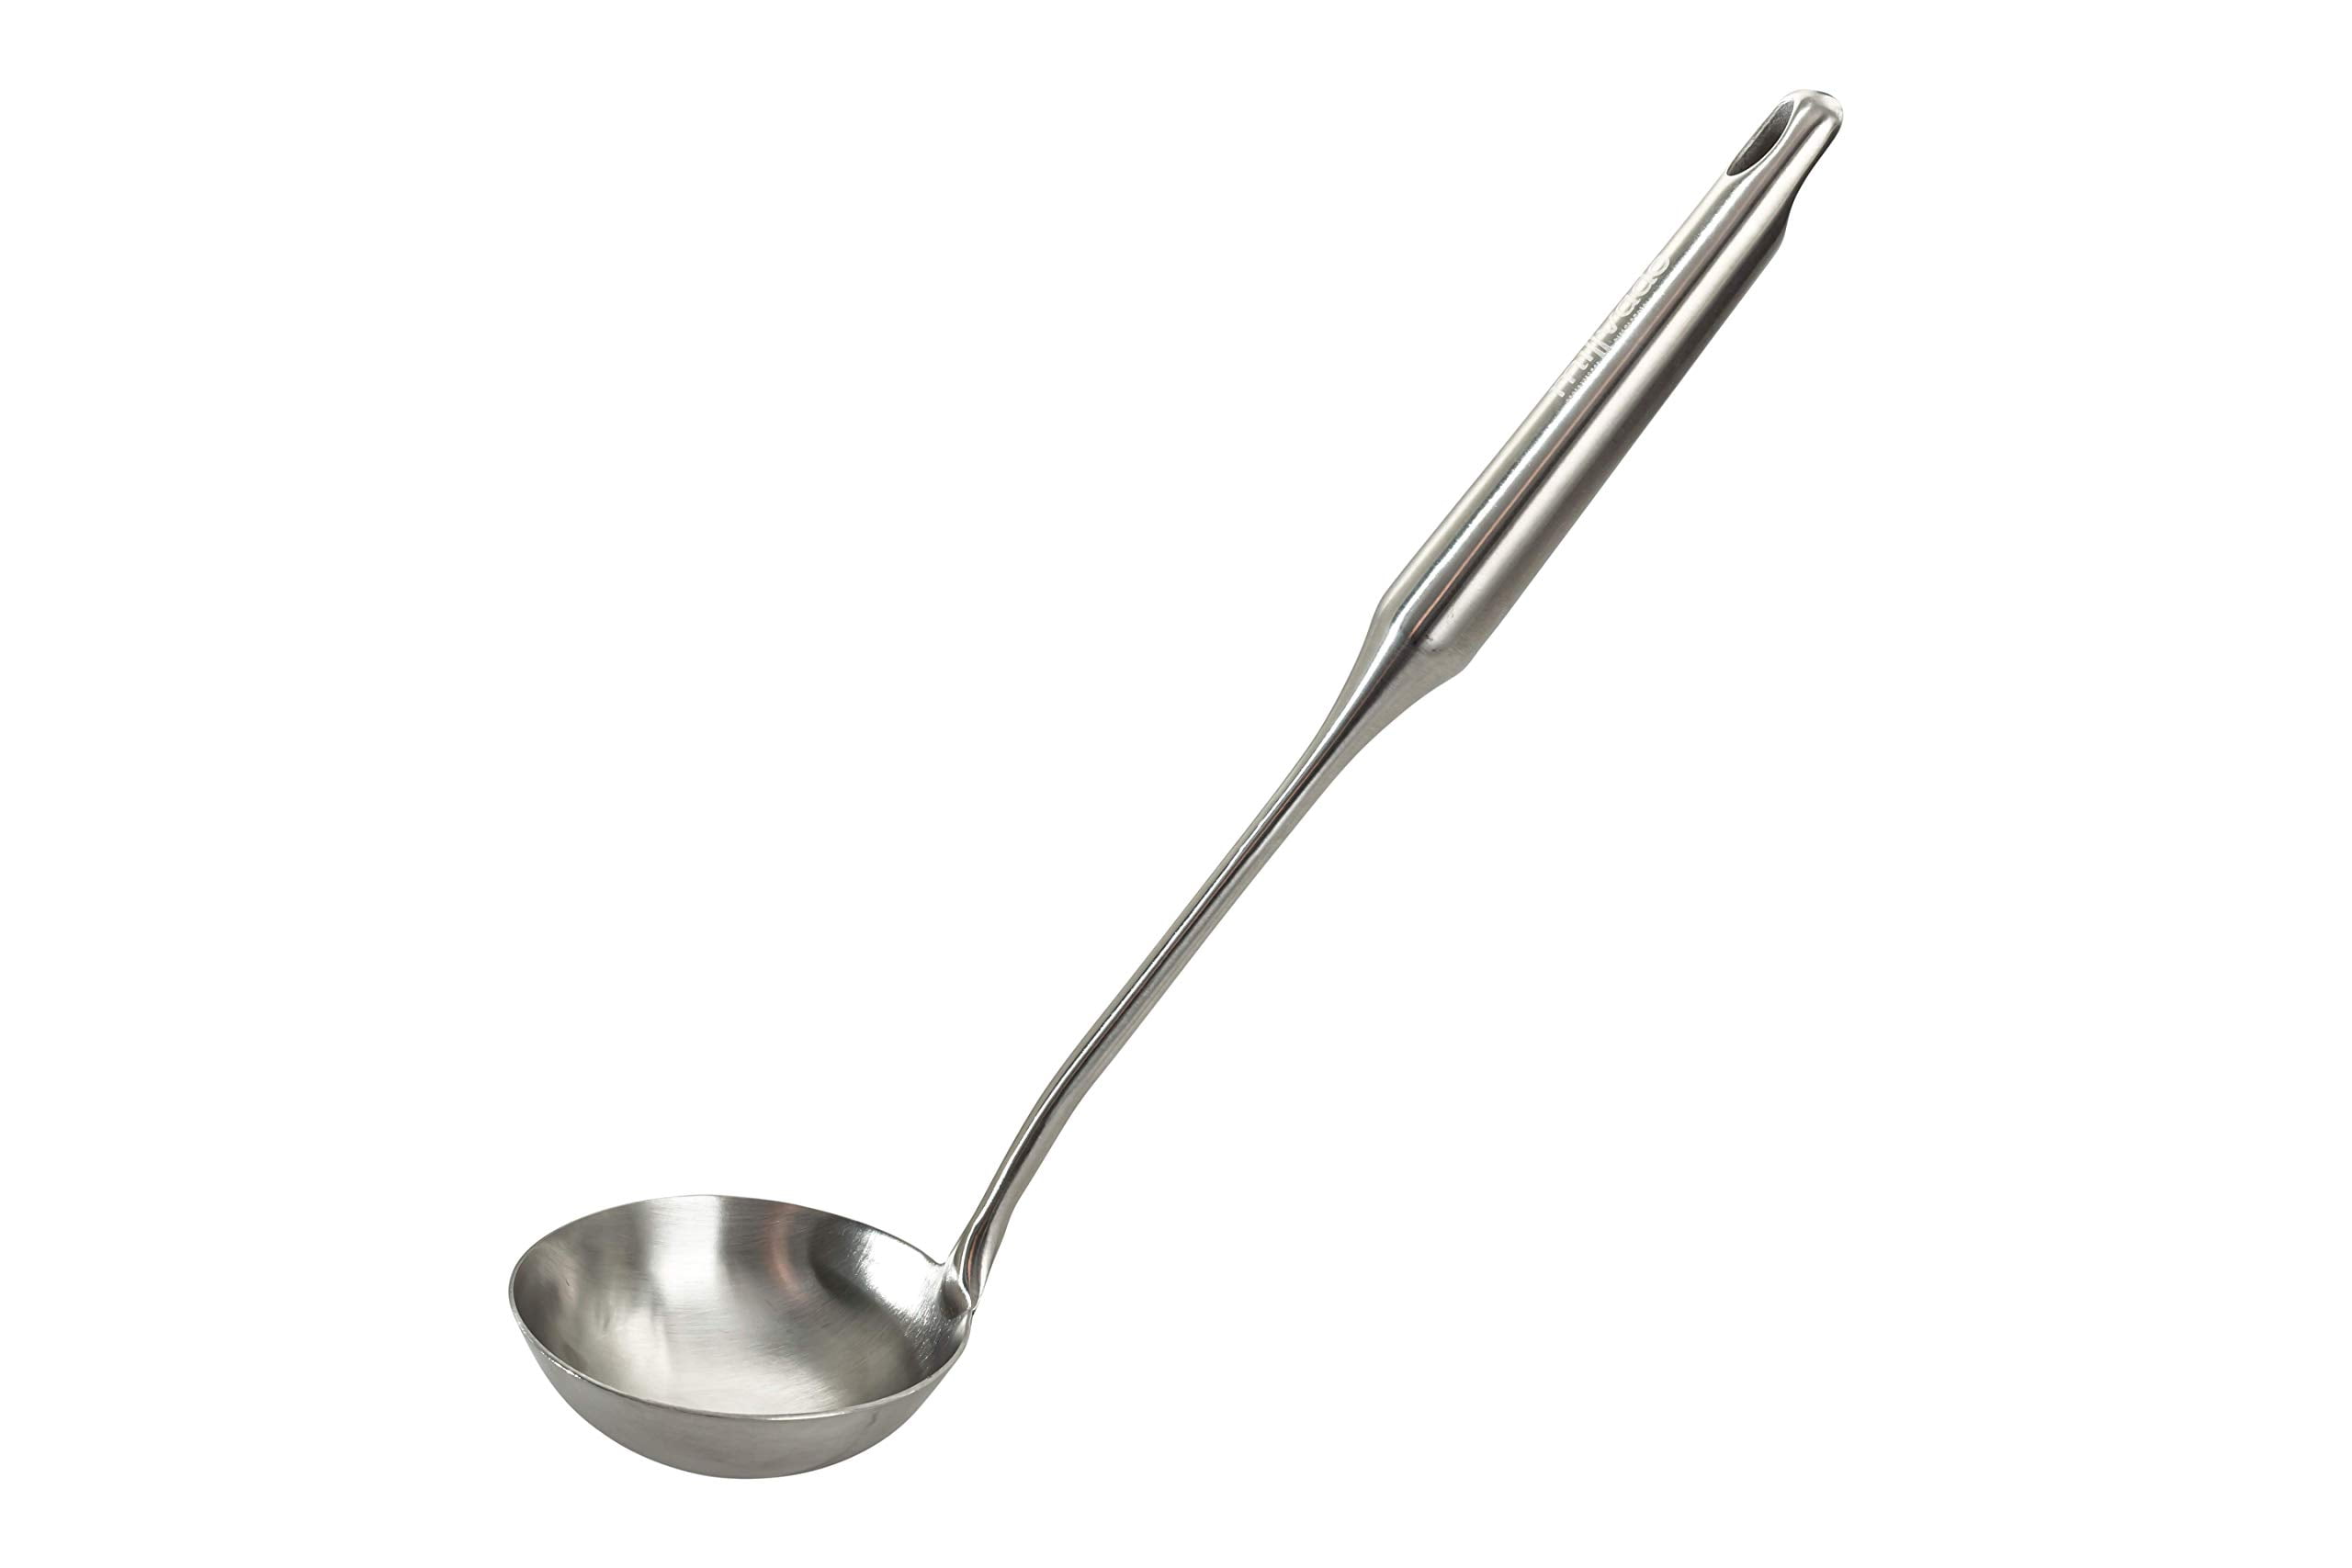 Milvado Brushed Stainless Steel Utensils - The Peppermill